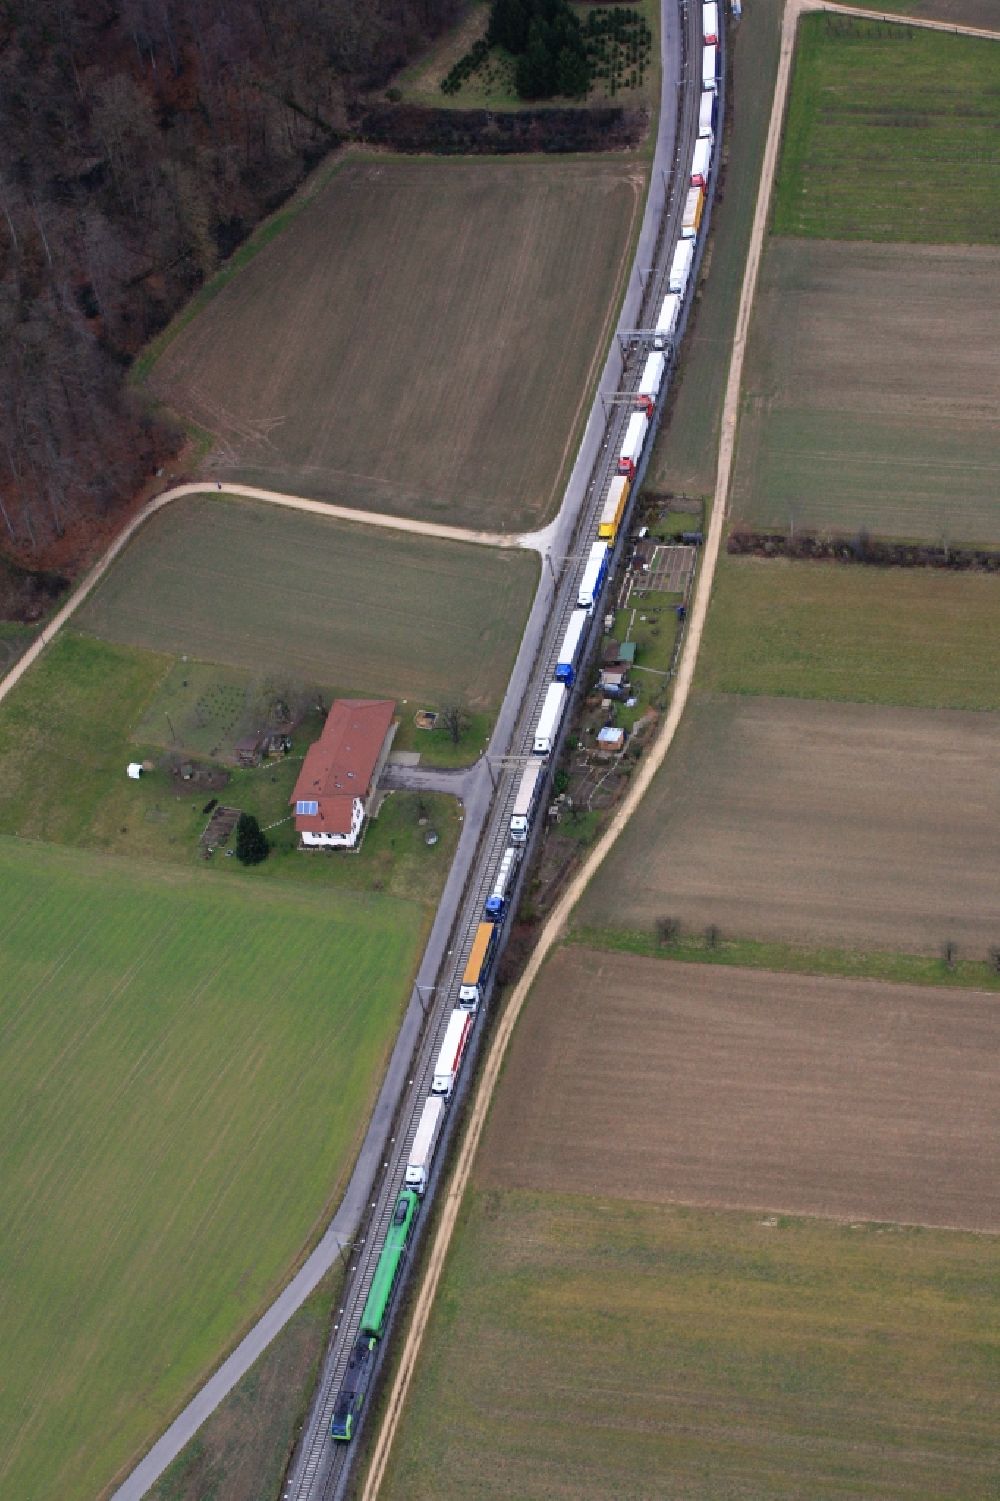 Aerial photograph Pratteln - Freight train with loaded trucks in Pratteln in Switzerland. The Alptransit NEAT is planning to expand the railways and to shift freight traffic for crossing the Alps from road to rail